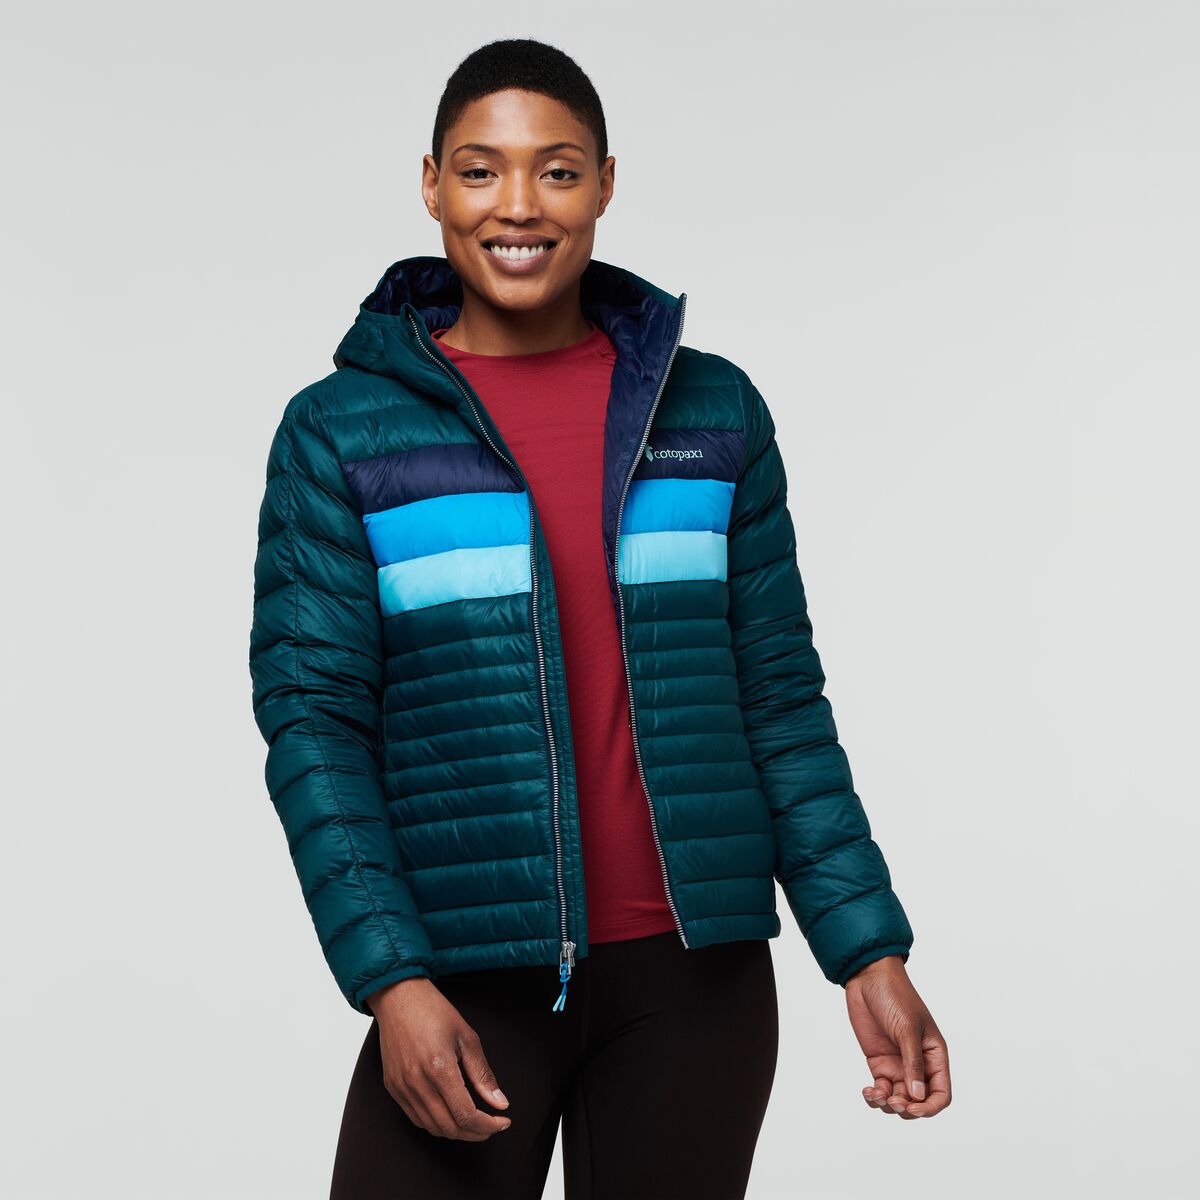 Cotopaxi W's Fuego Down Hooded Jacket - Responsibly sourced down Deep Ocean Stripes Jacket